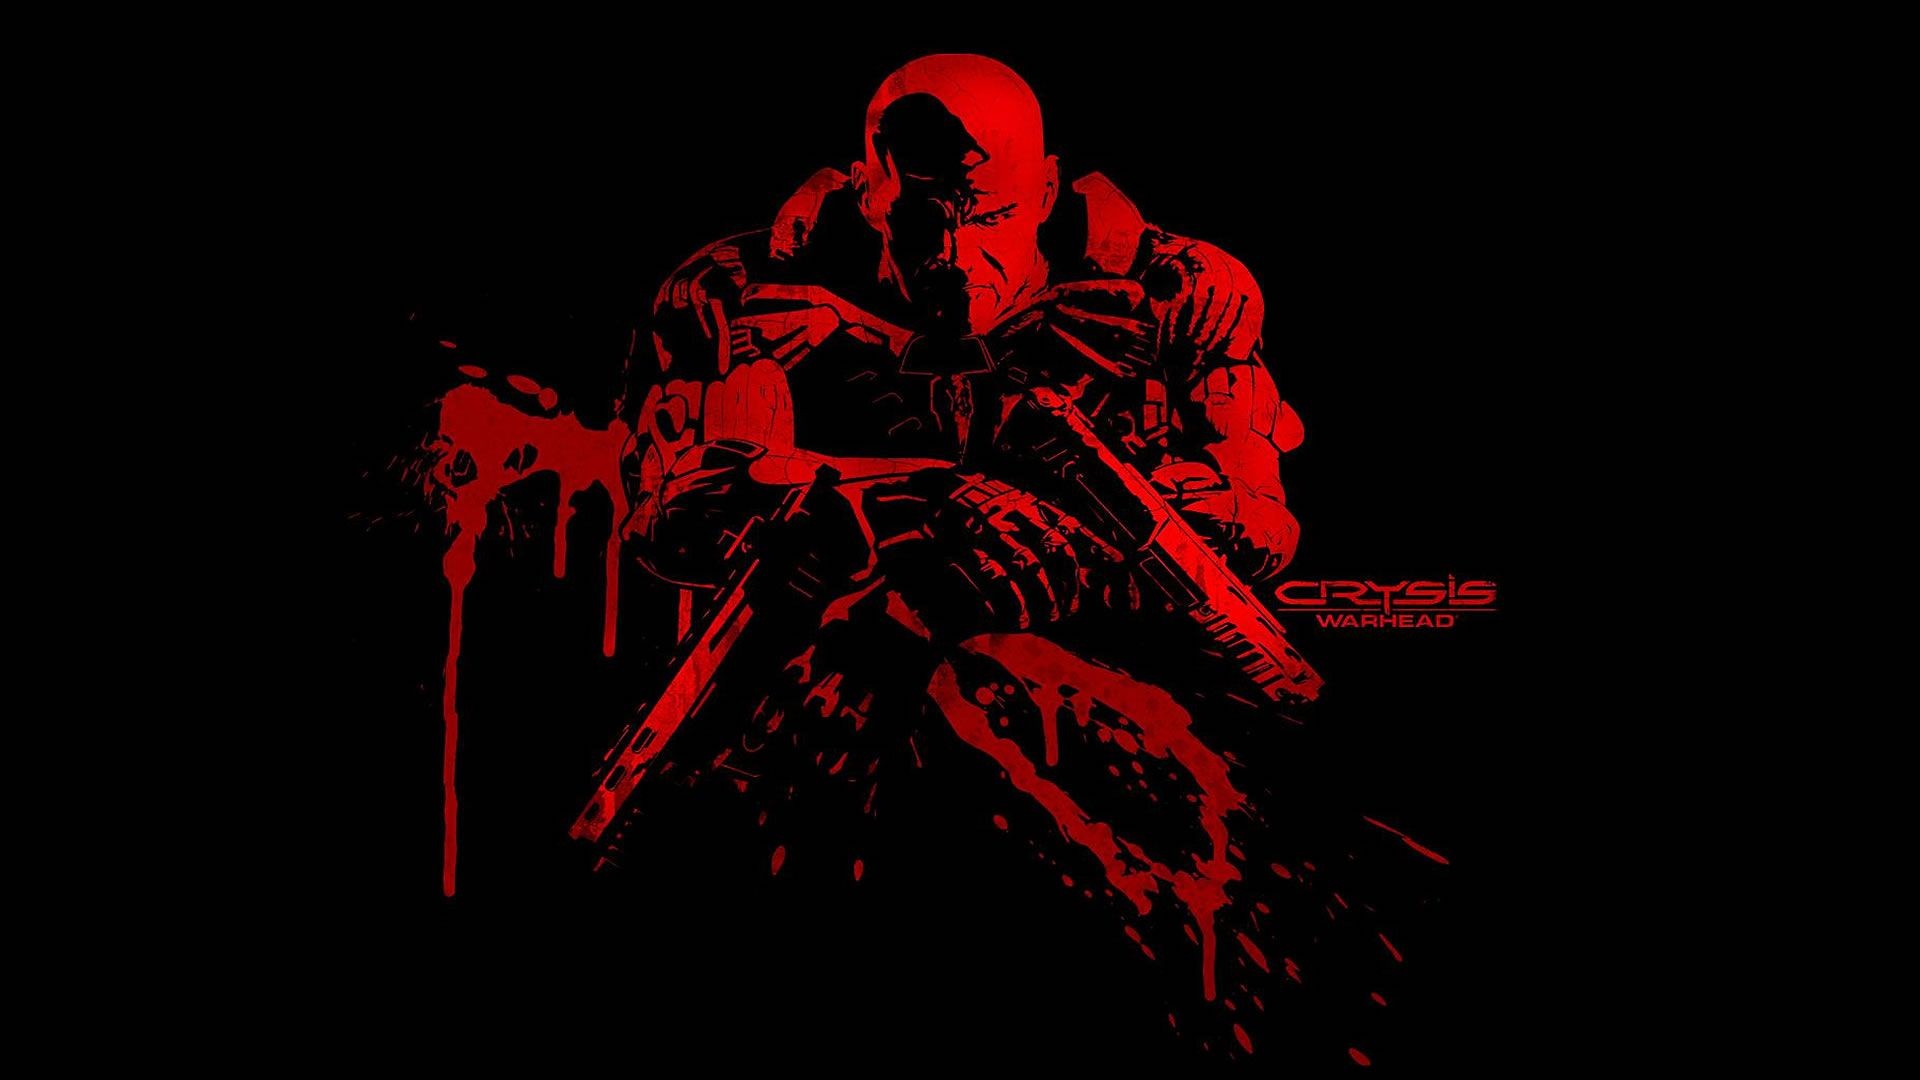 1920x1080 blood red | Psycho In Blood Red - Action Games Wallpaper Image featuring  Crysis .